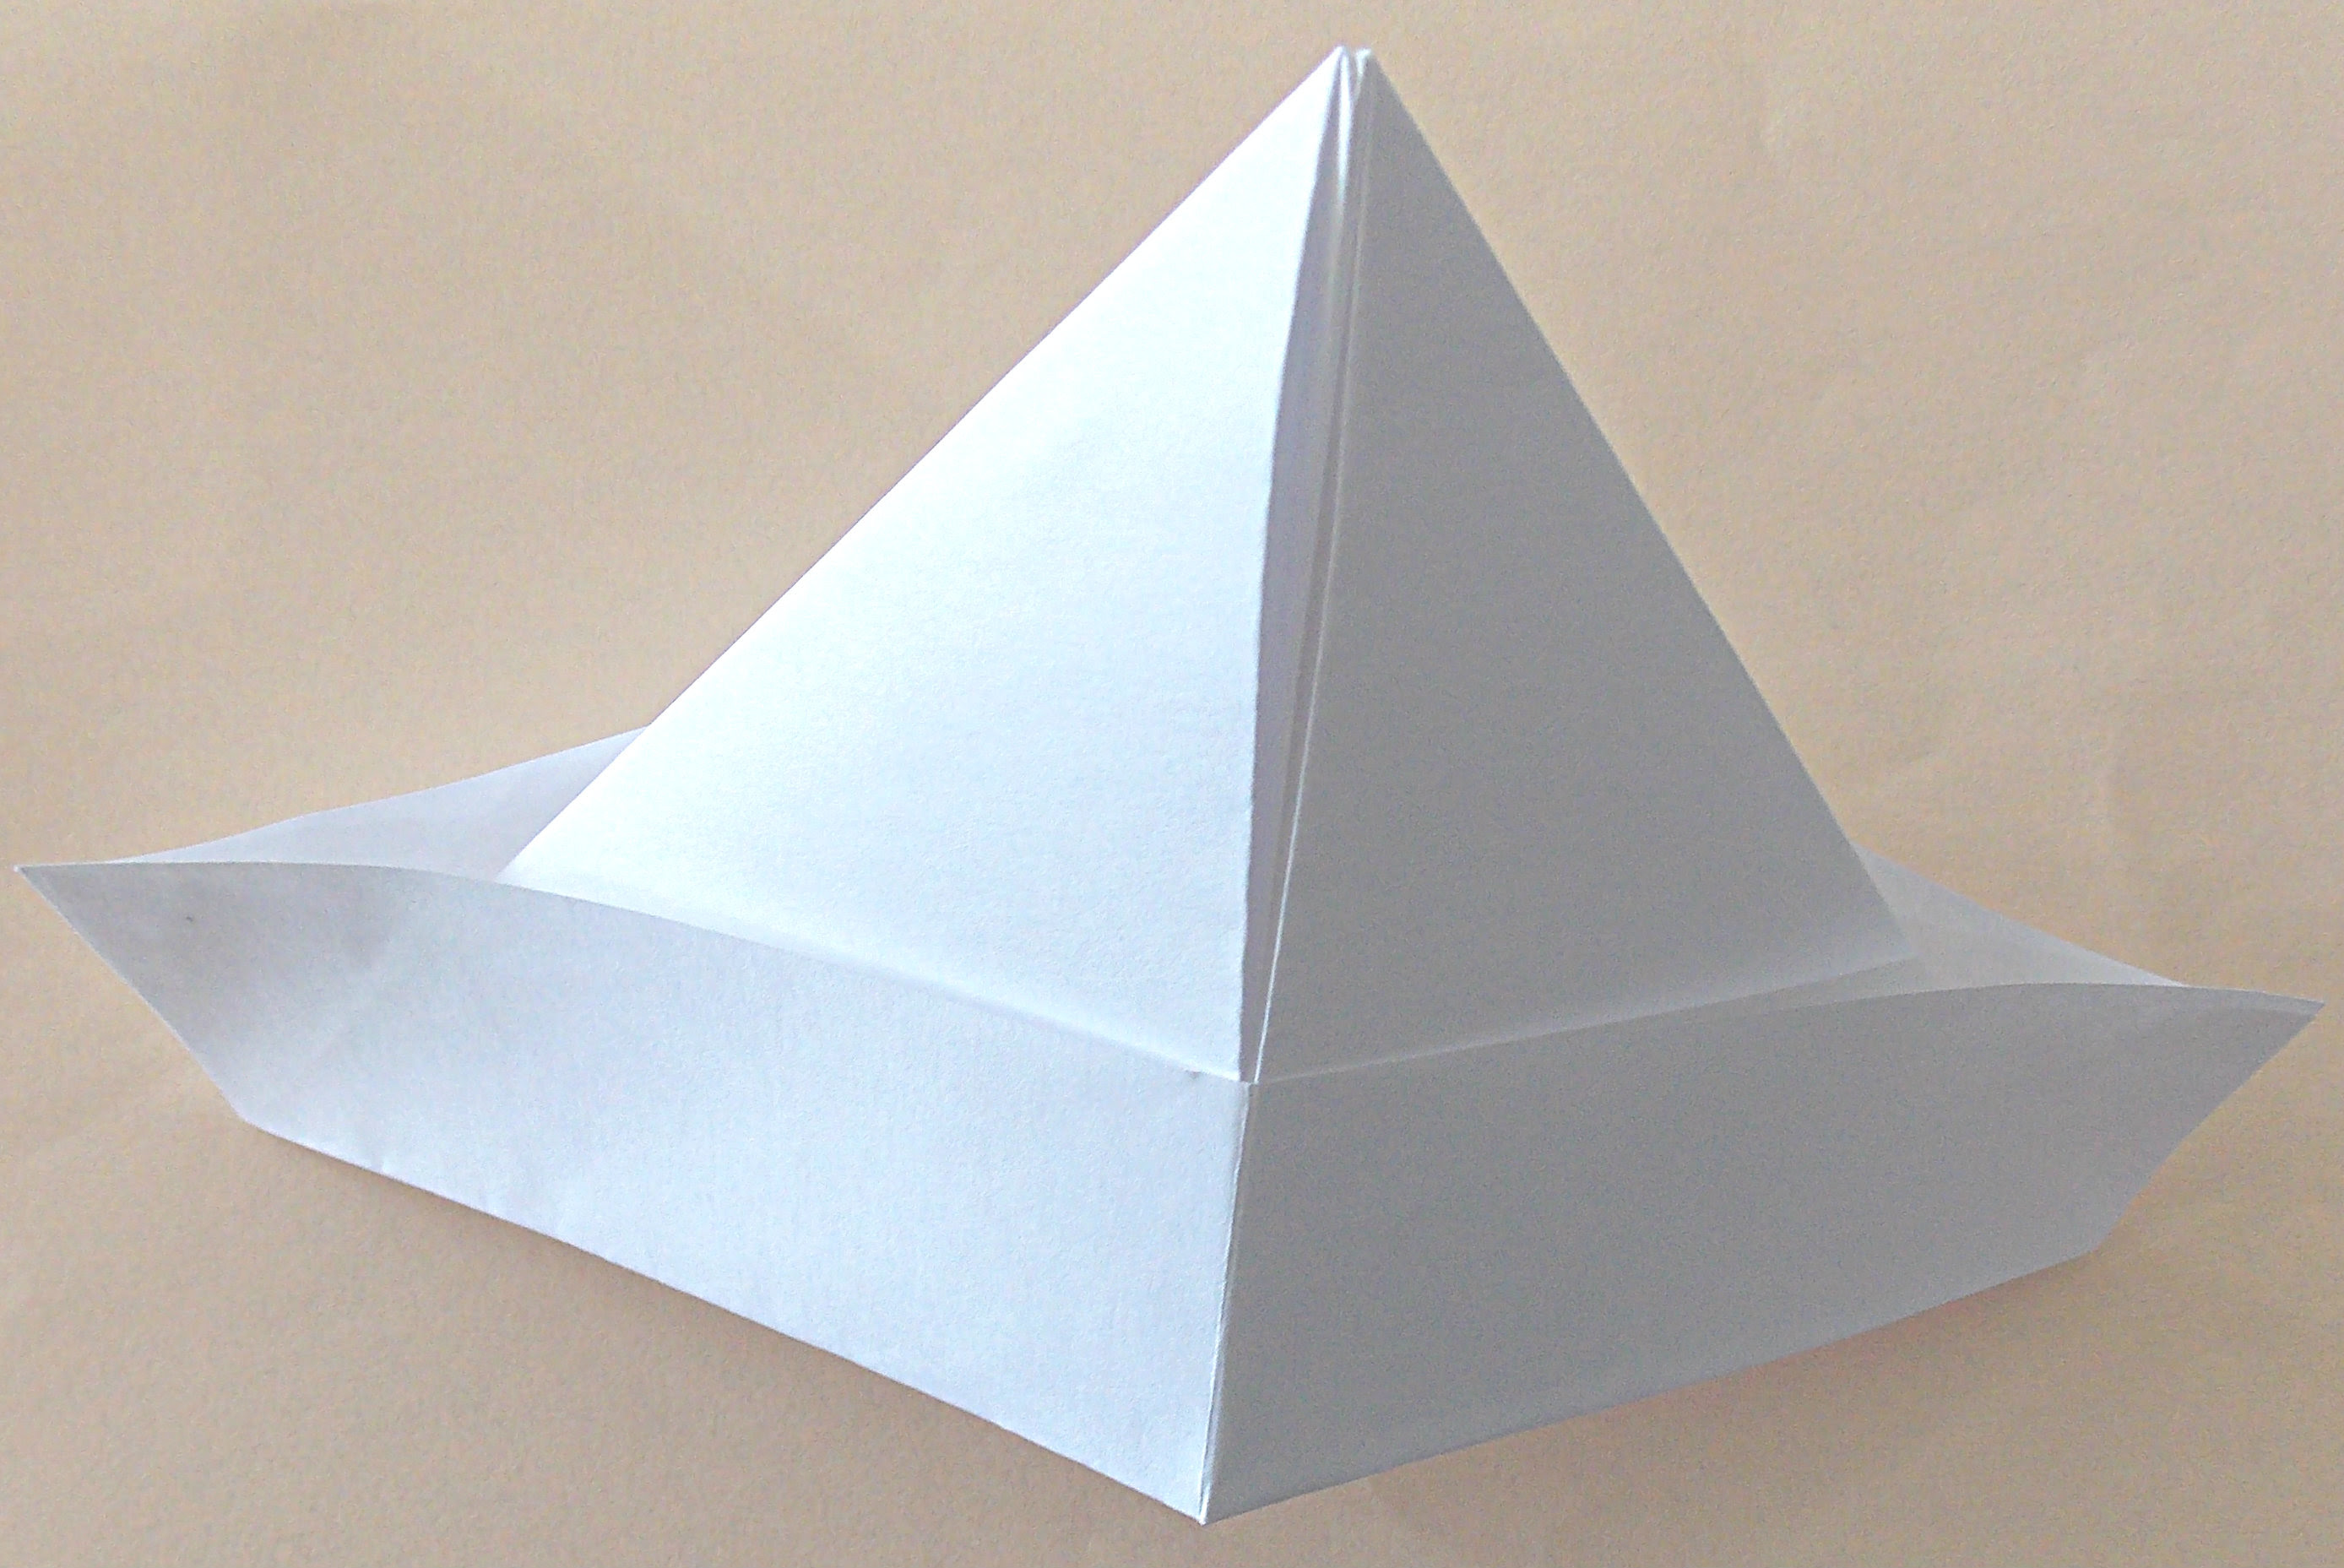 How to make a paper boat hat